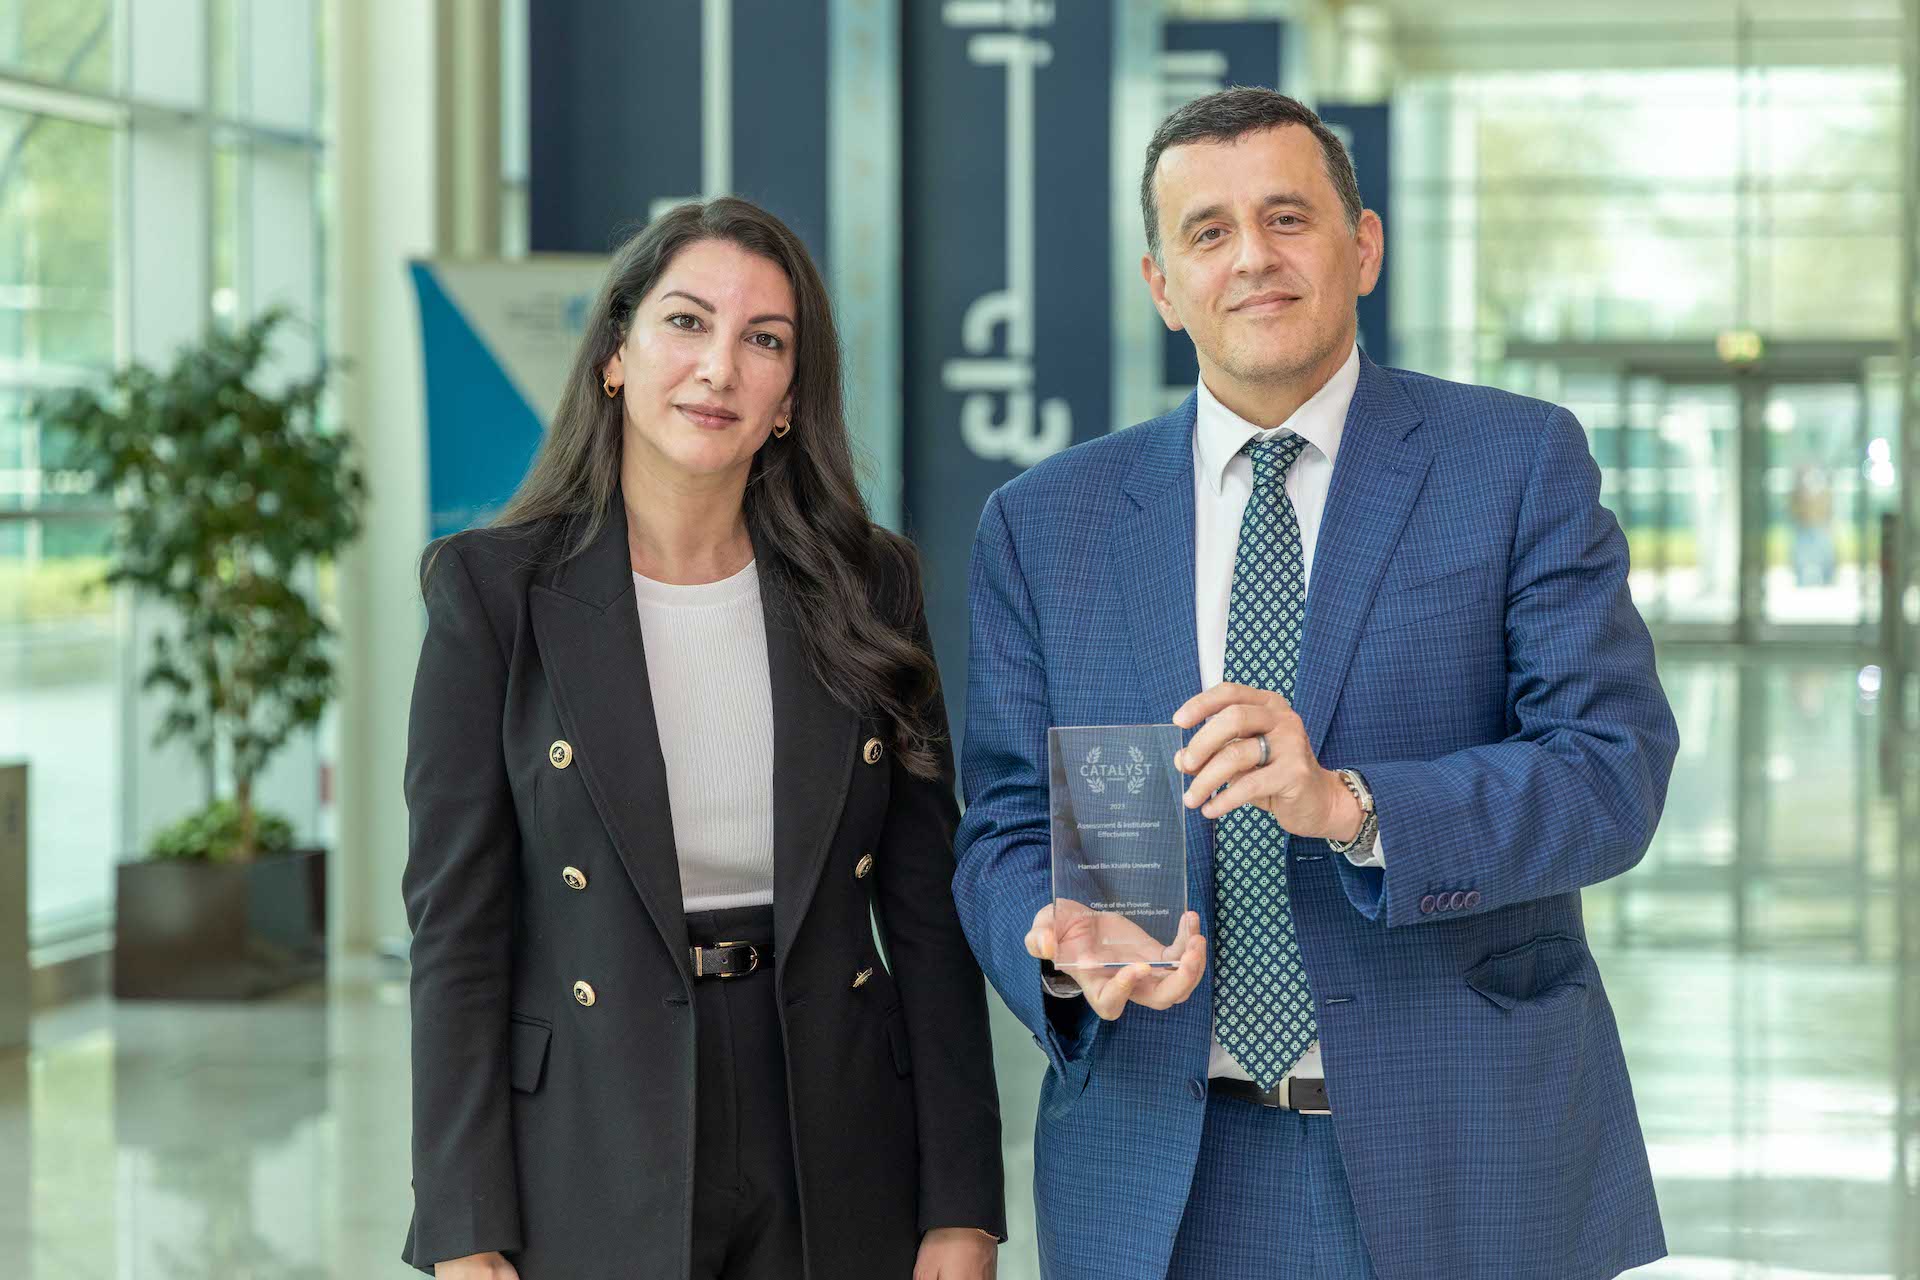 Dr. Ala Al-Fuqaha, Associate Provost for Teaching and Learning, and Mohja Jerbi, Instructional Design Specialist, received the award on behalf of HBKU’s Provost Office.